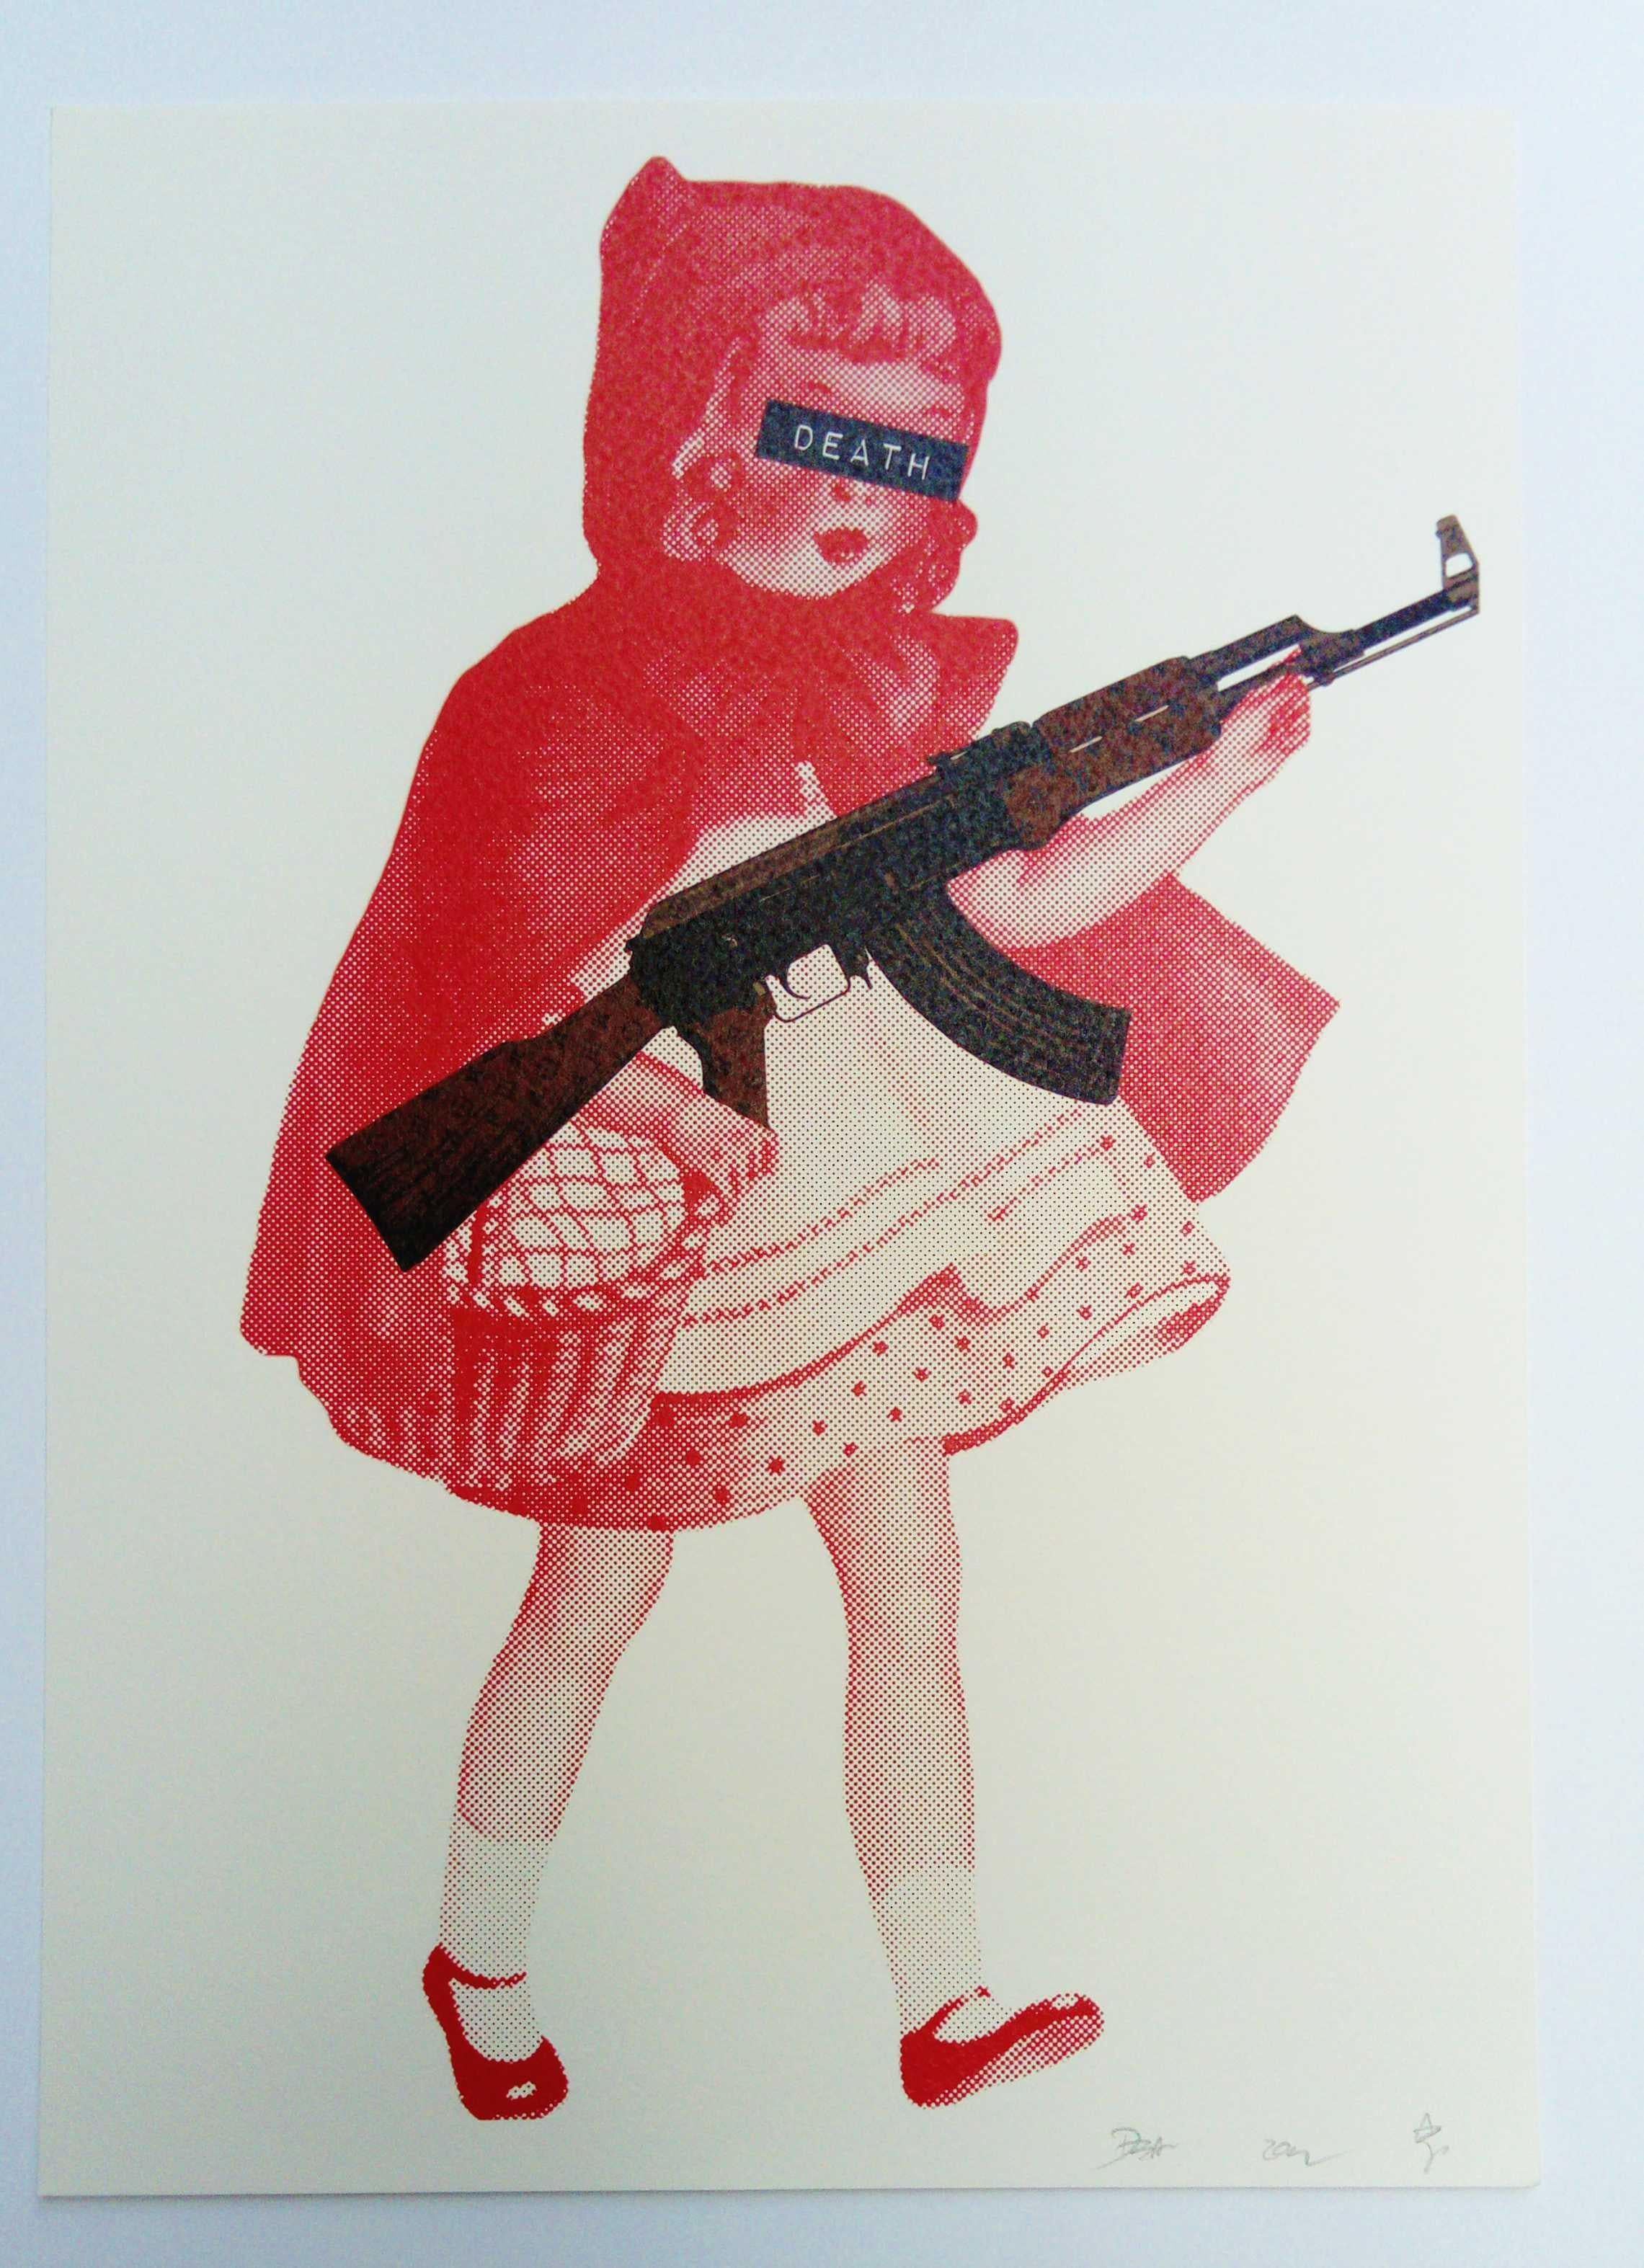 Little Red Riding Hood with Gun - Print by Death NYC